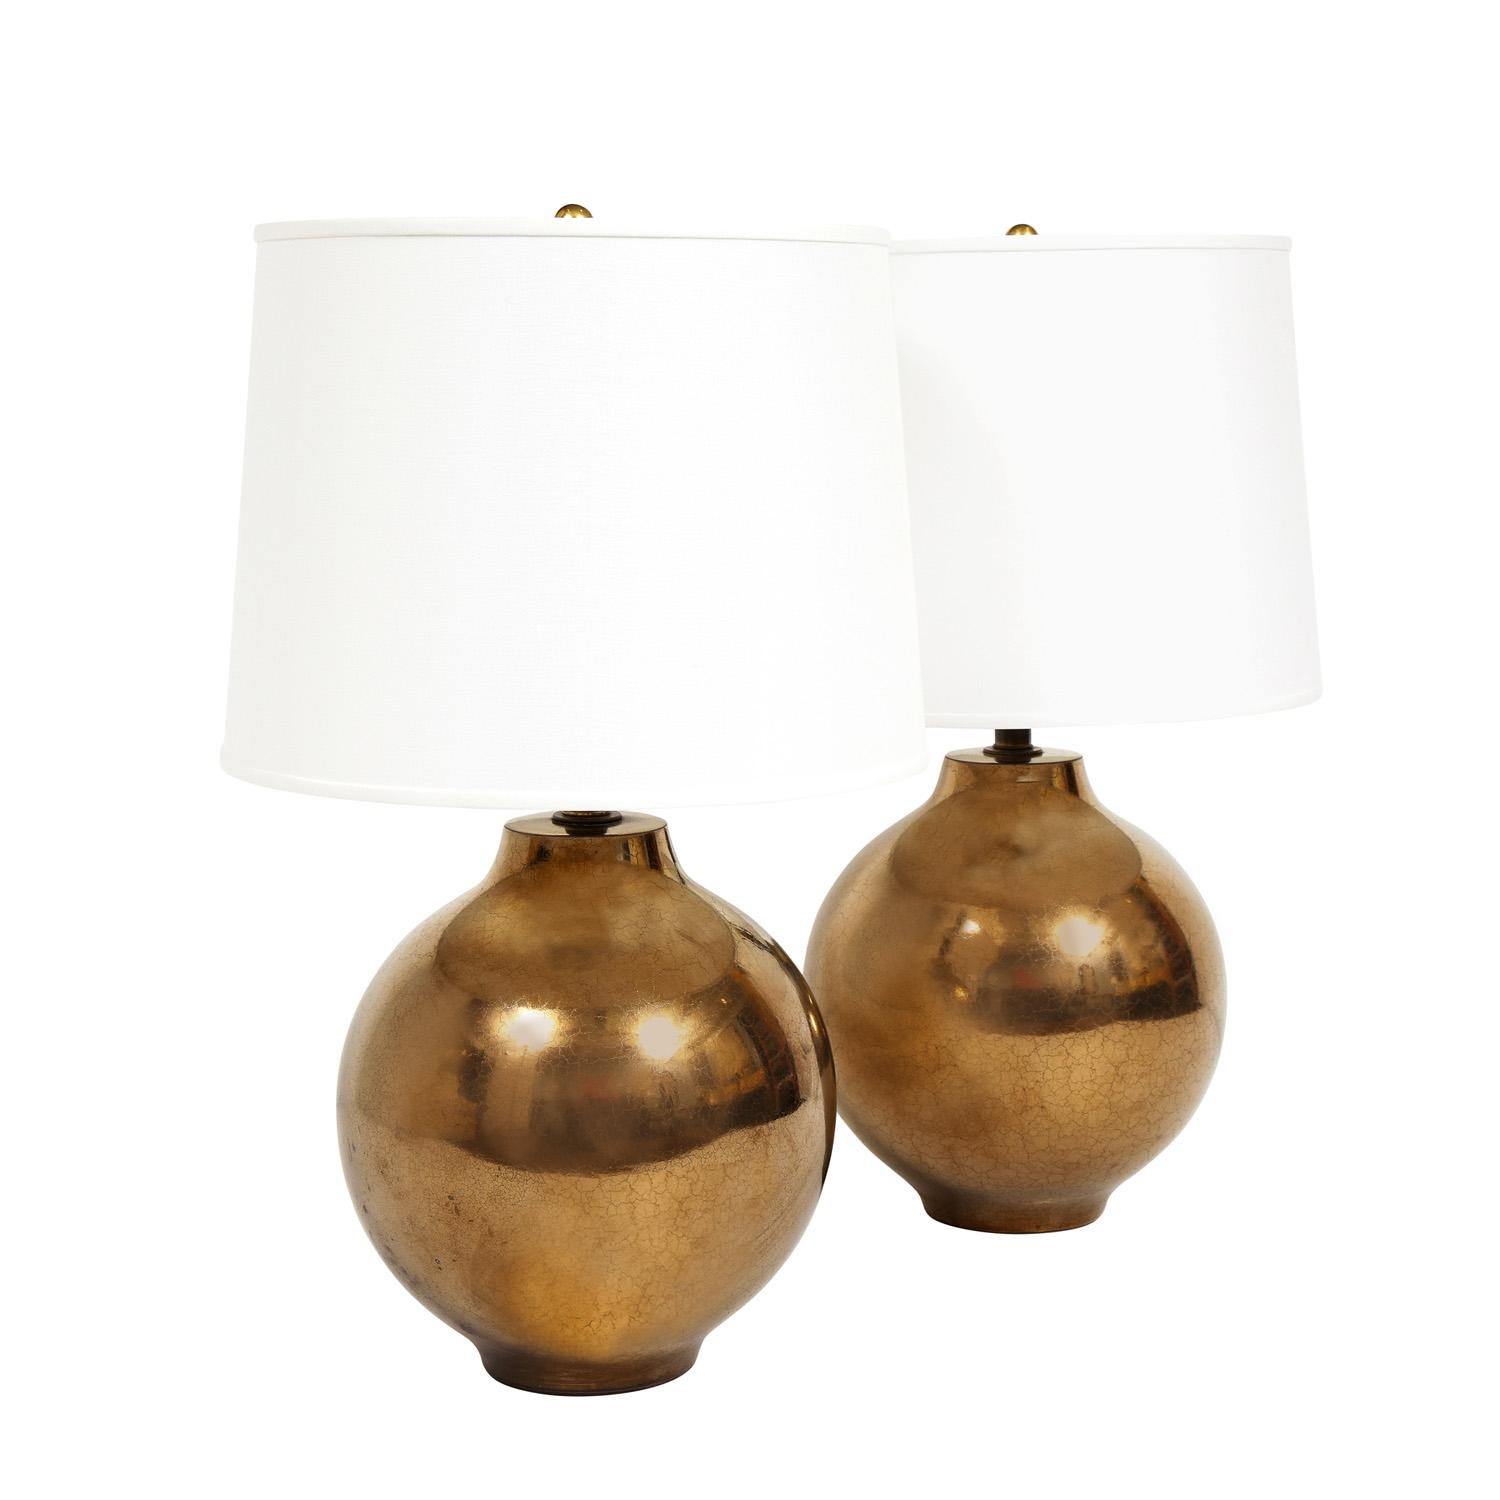 Elegant pair of artisan ceramic table lamps with craquele bronze gold glaze with bronze hardware, American 1970's. The color and glaze are beautiful.

Measures: Shade Diameter: 16 inches
Shade High: 12 inches.